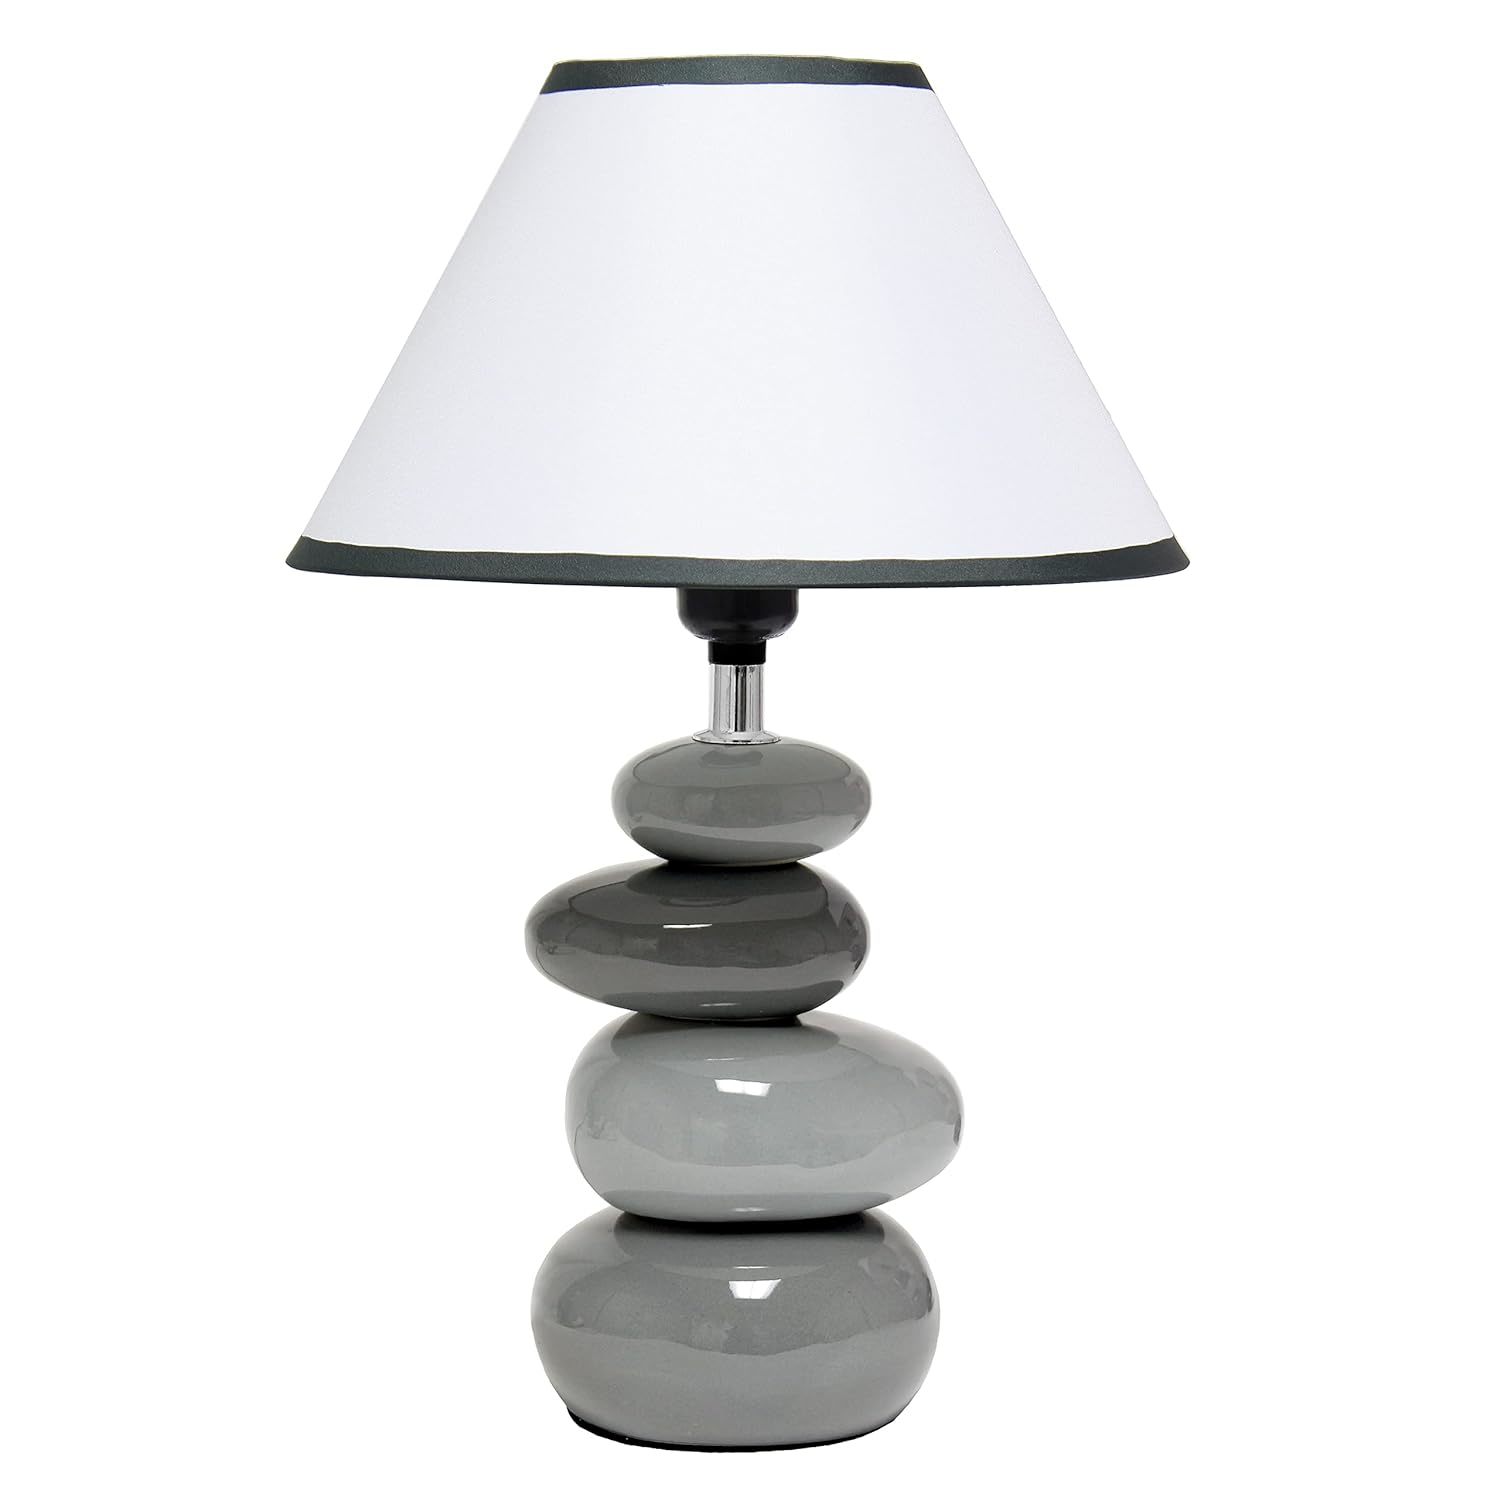 Primary image for Simple Designs LT3052-GRY 14.7" Shades of Gray Ceramic Stacked Stone Standard Ta